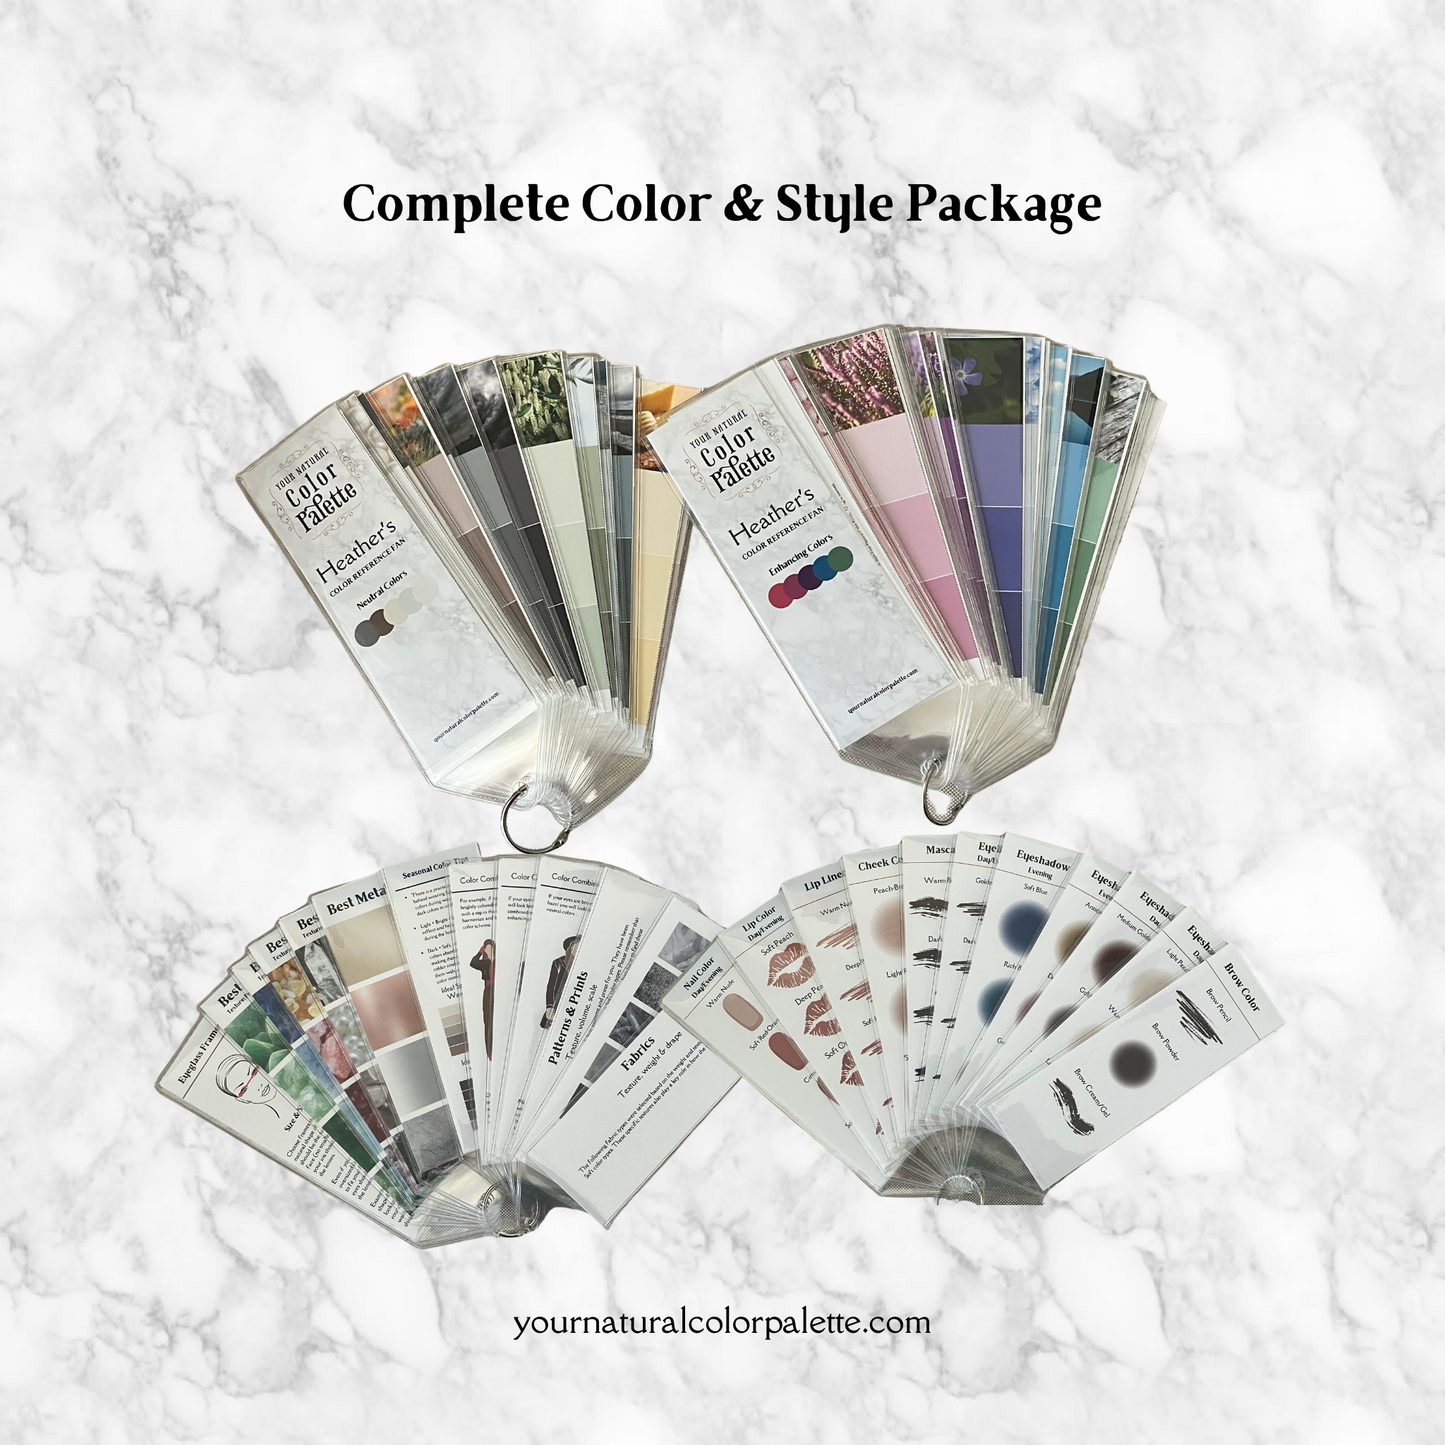 Complete Color and Style Package